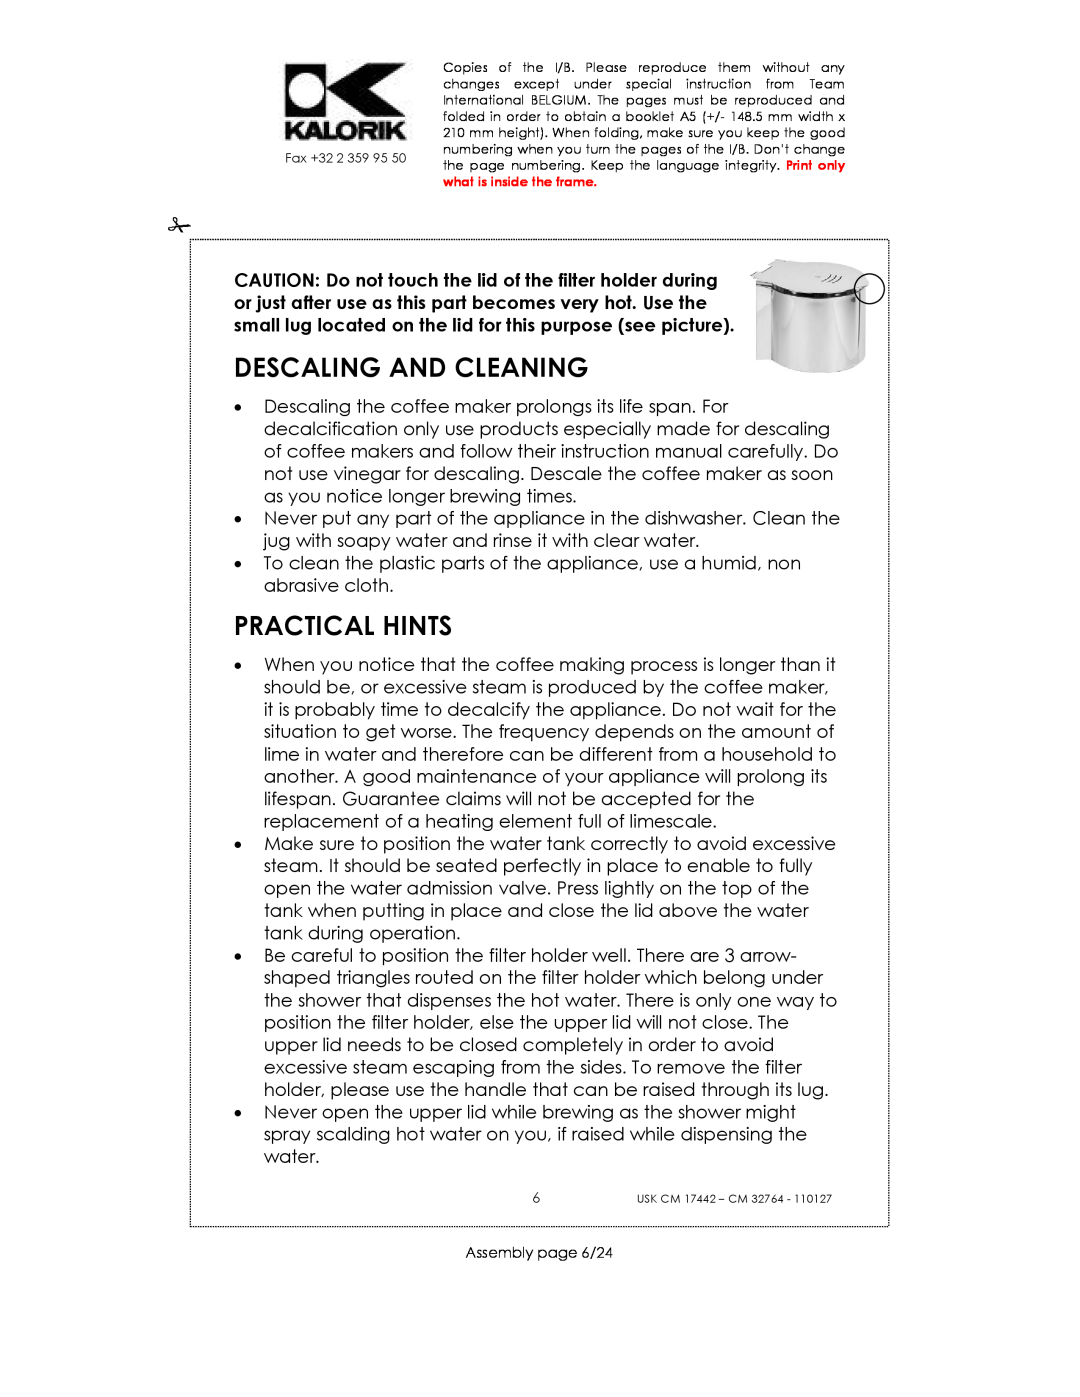 Kalorik USK CM 17442, USK CM 32764 manual Descaling And Cleaning, Practical Hints, Assembly page 6/24 